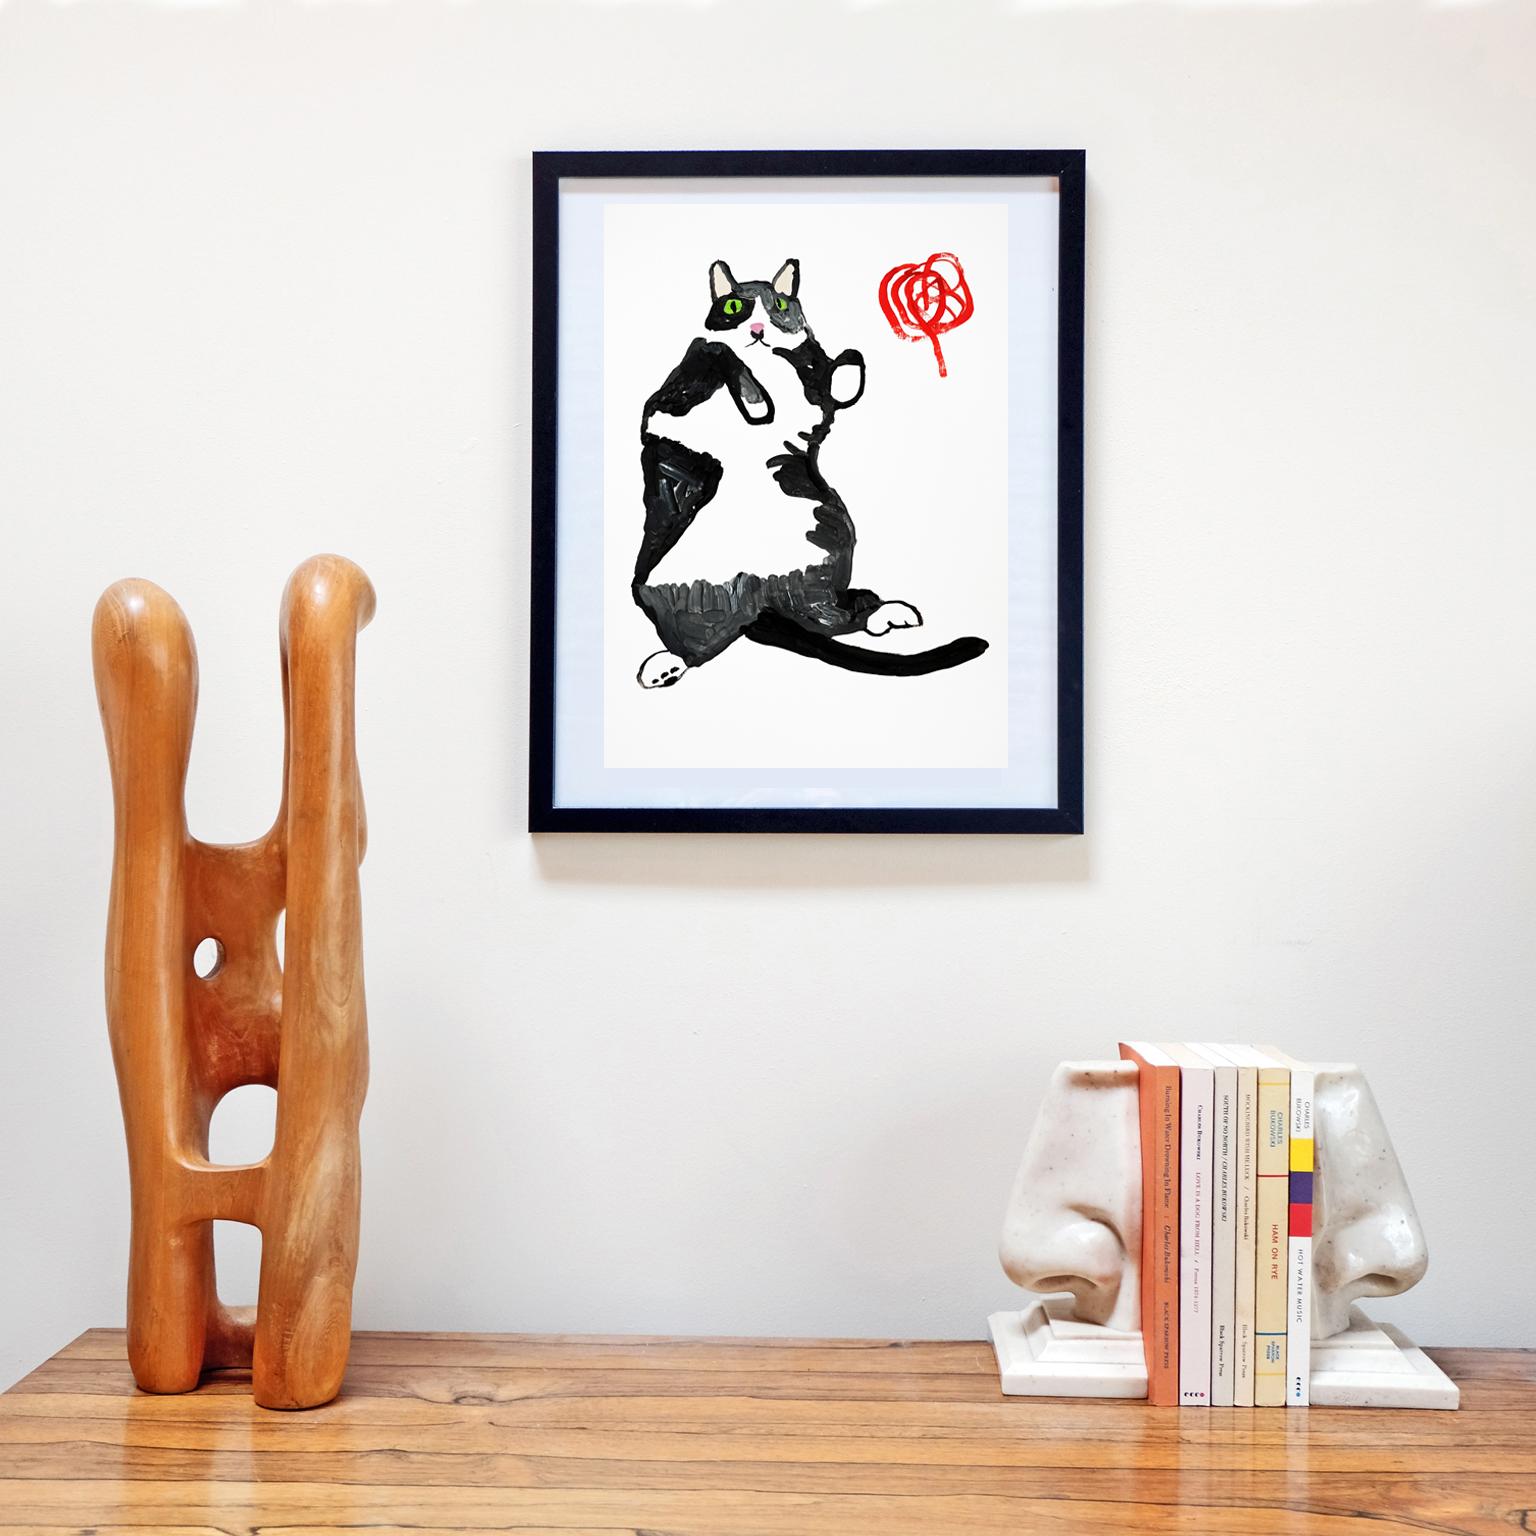 Modern 'String Theory' Cat Portrait Painting by Alan Fears Acrylic on Paper Pop Art